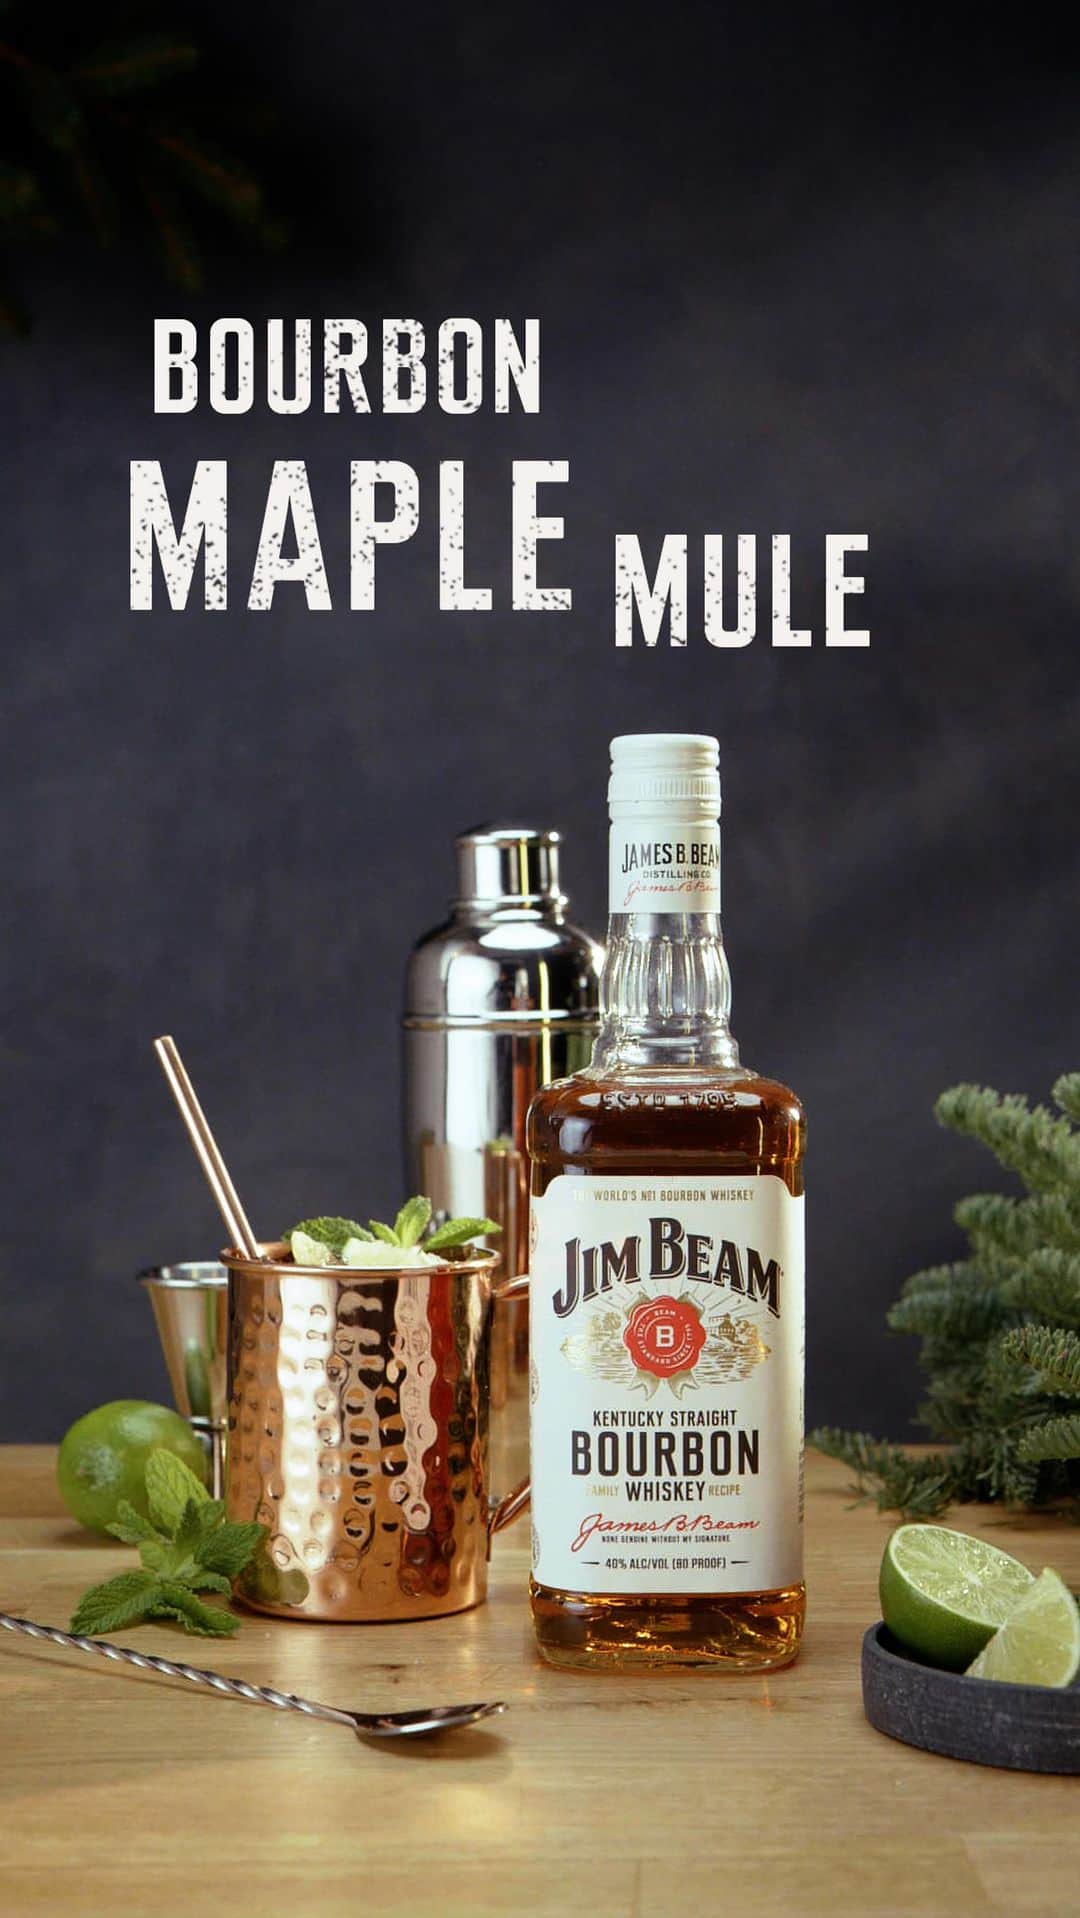 Jim Beamのインスタグラム：「Mix today, mingle tomorrow. This Bourbon Maple Mule is made for making ahead.⁣  ⁣ ---⁣  ⁣ Recipe:⁣ 11-12 servings⁣  ⁣ 750ml Jim Beam™⁣ 4oz of Maple Syrup⁣ 18 dashes Angostura™ Bitters⁣ 24oz Ginger Beer⁣ 6 oz Lime Juice⁣ Garnish with Mint Sprig and Candied Ginger⁣  ⁣ Pour out 7oz Jim Beam™ and set aside for future use. Add 4oz of Maple Syrup. Add 18 dashes Angostura™ Bitters. Shake and chill in freezer overnight. When ready to serve, add 2oz to the cocktail with ice and top off with 2oz of ginger beer, .5 ounce of Lime Juice and stir. Garnish with Mint Sprig and Candied Ginger.」